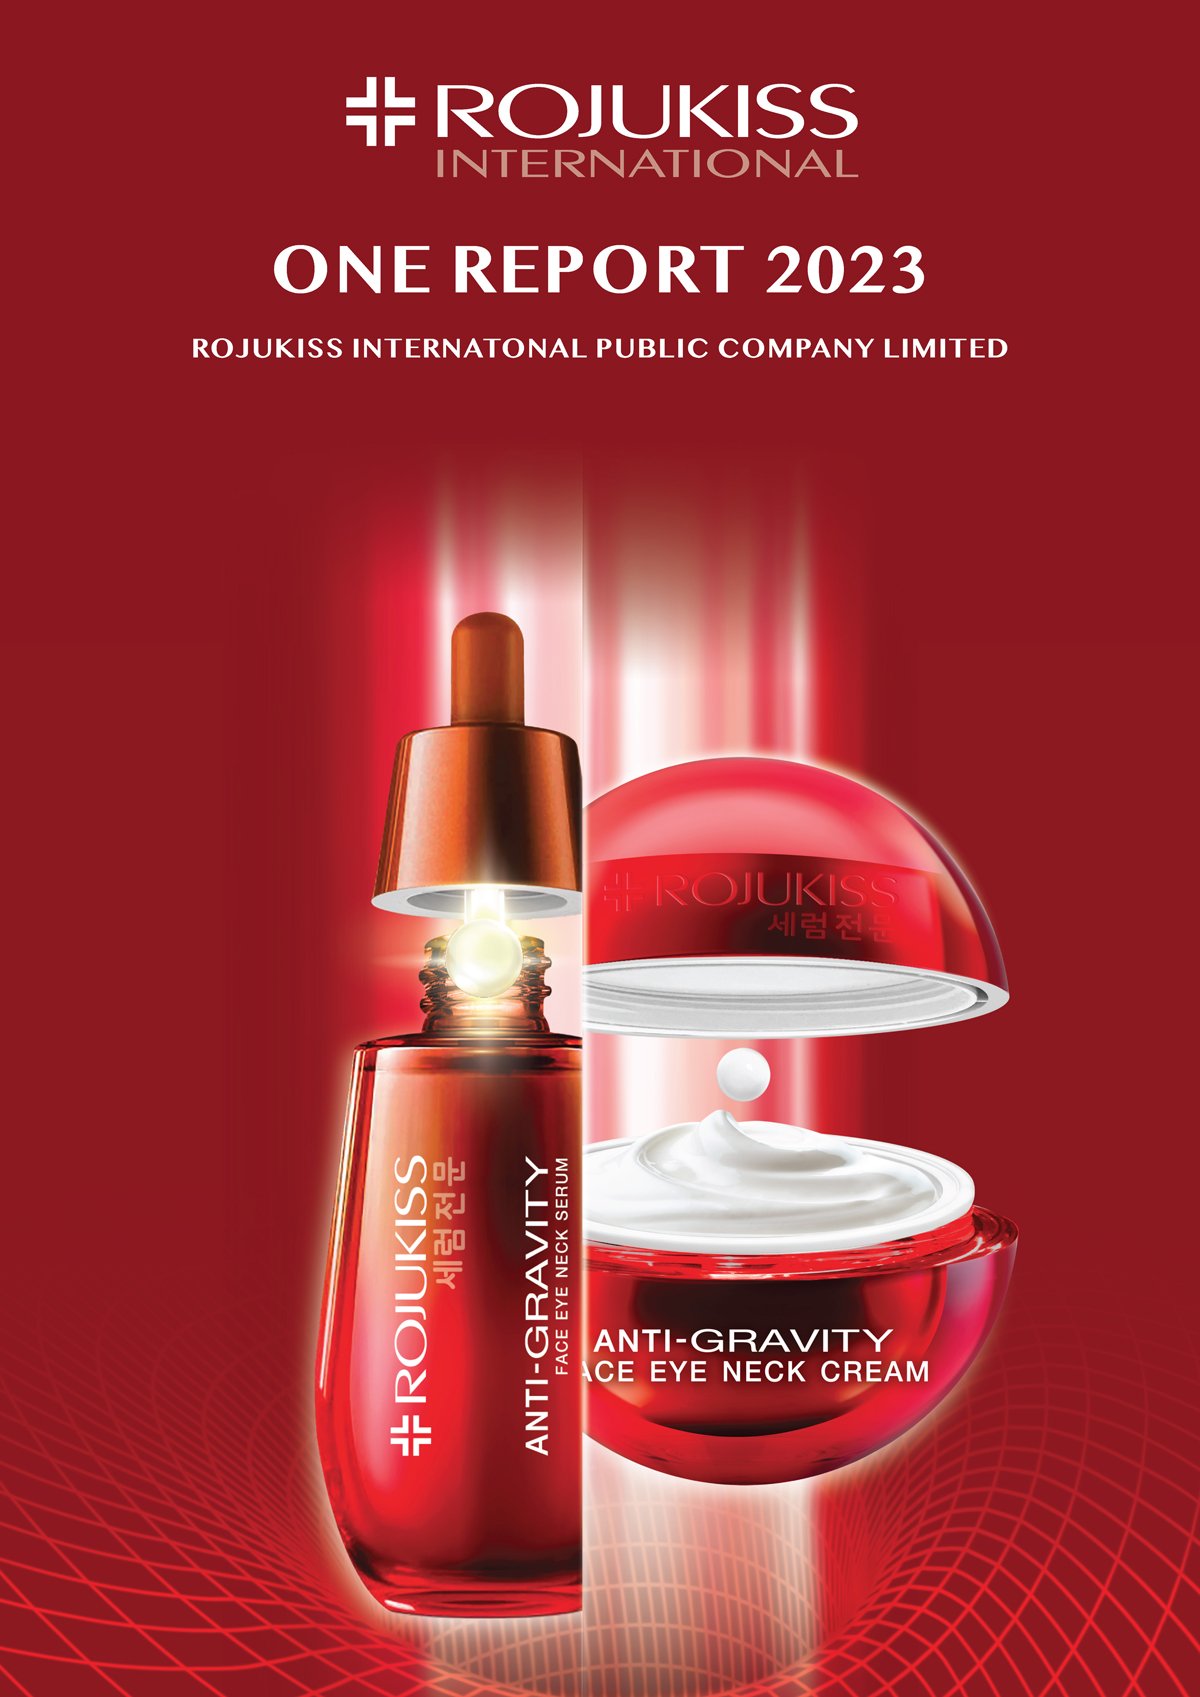 One Report 2023